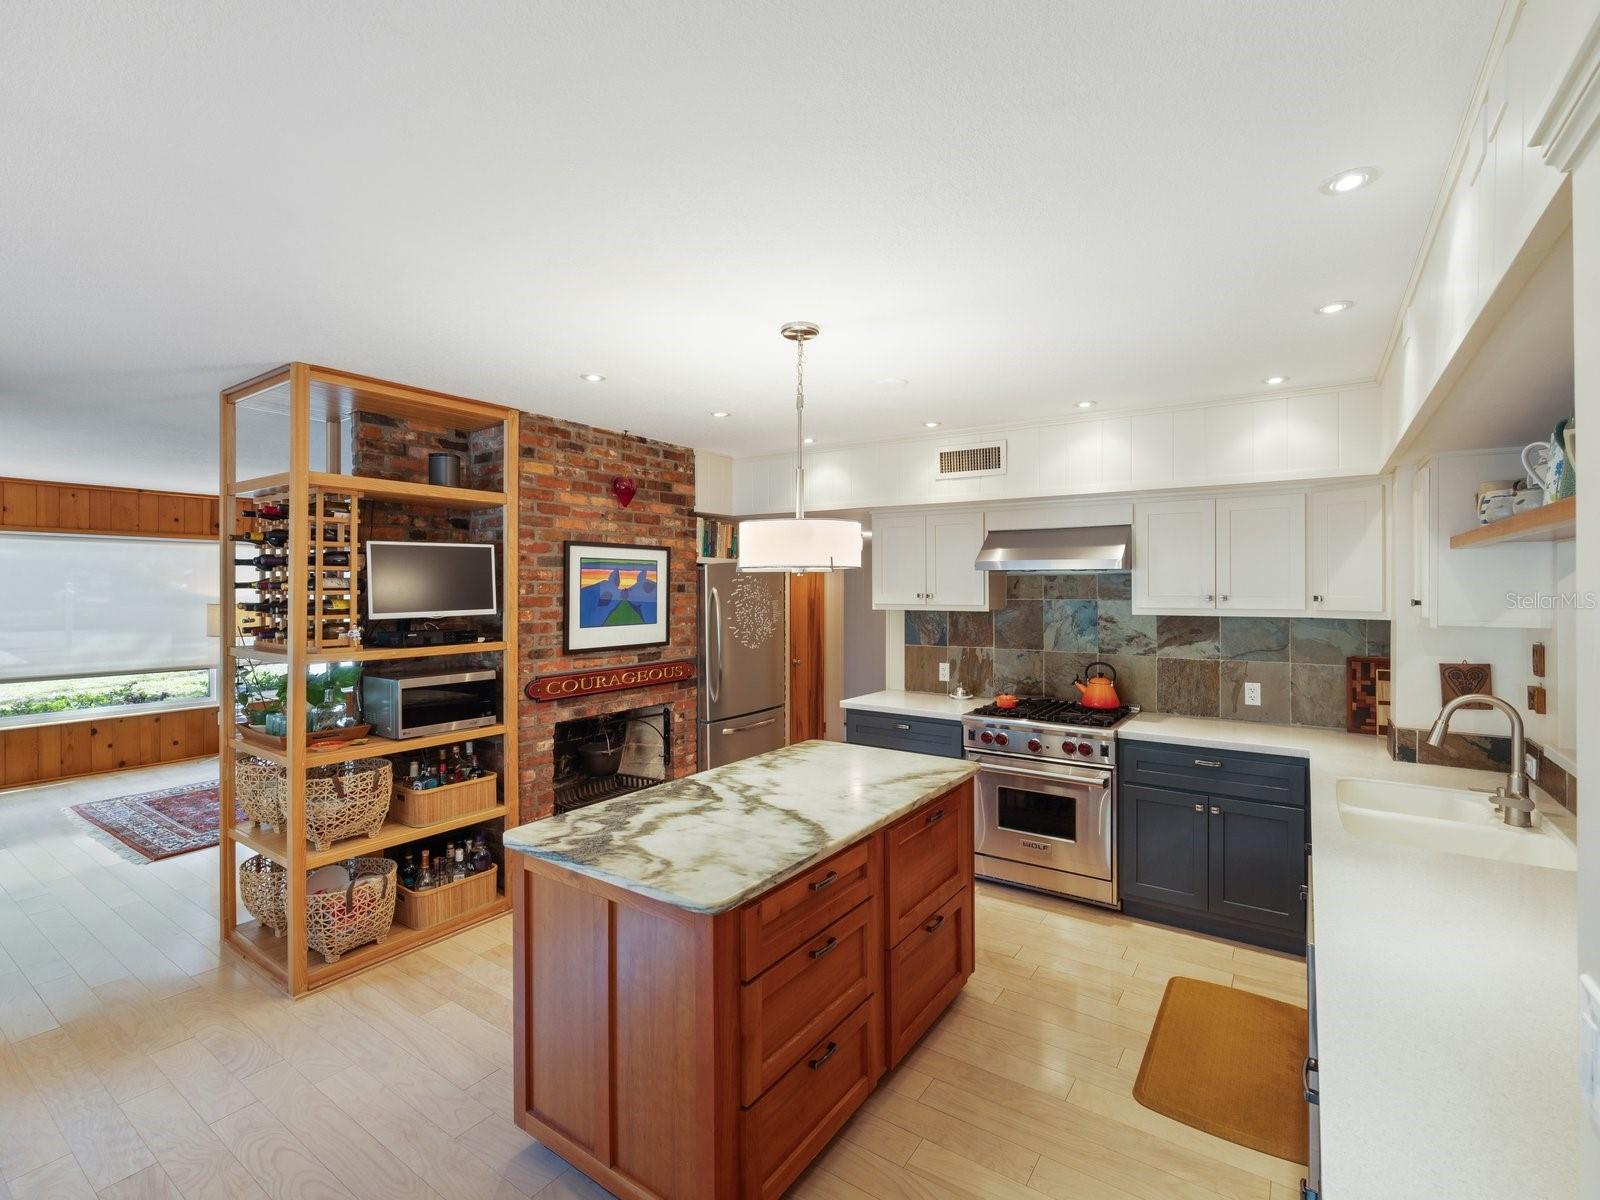 Kitchen with island and custom shelving